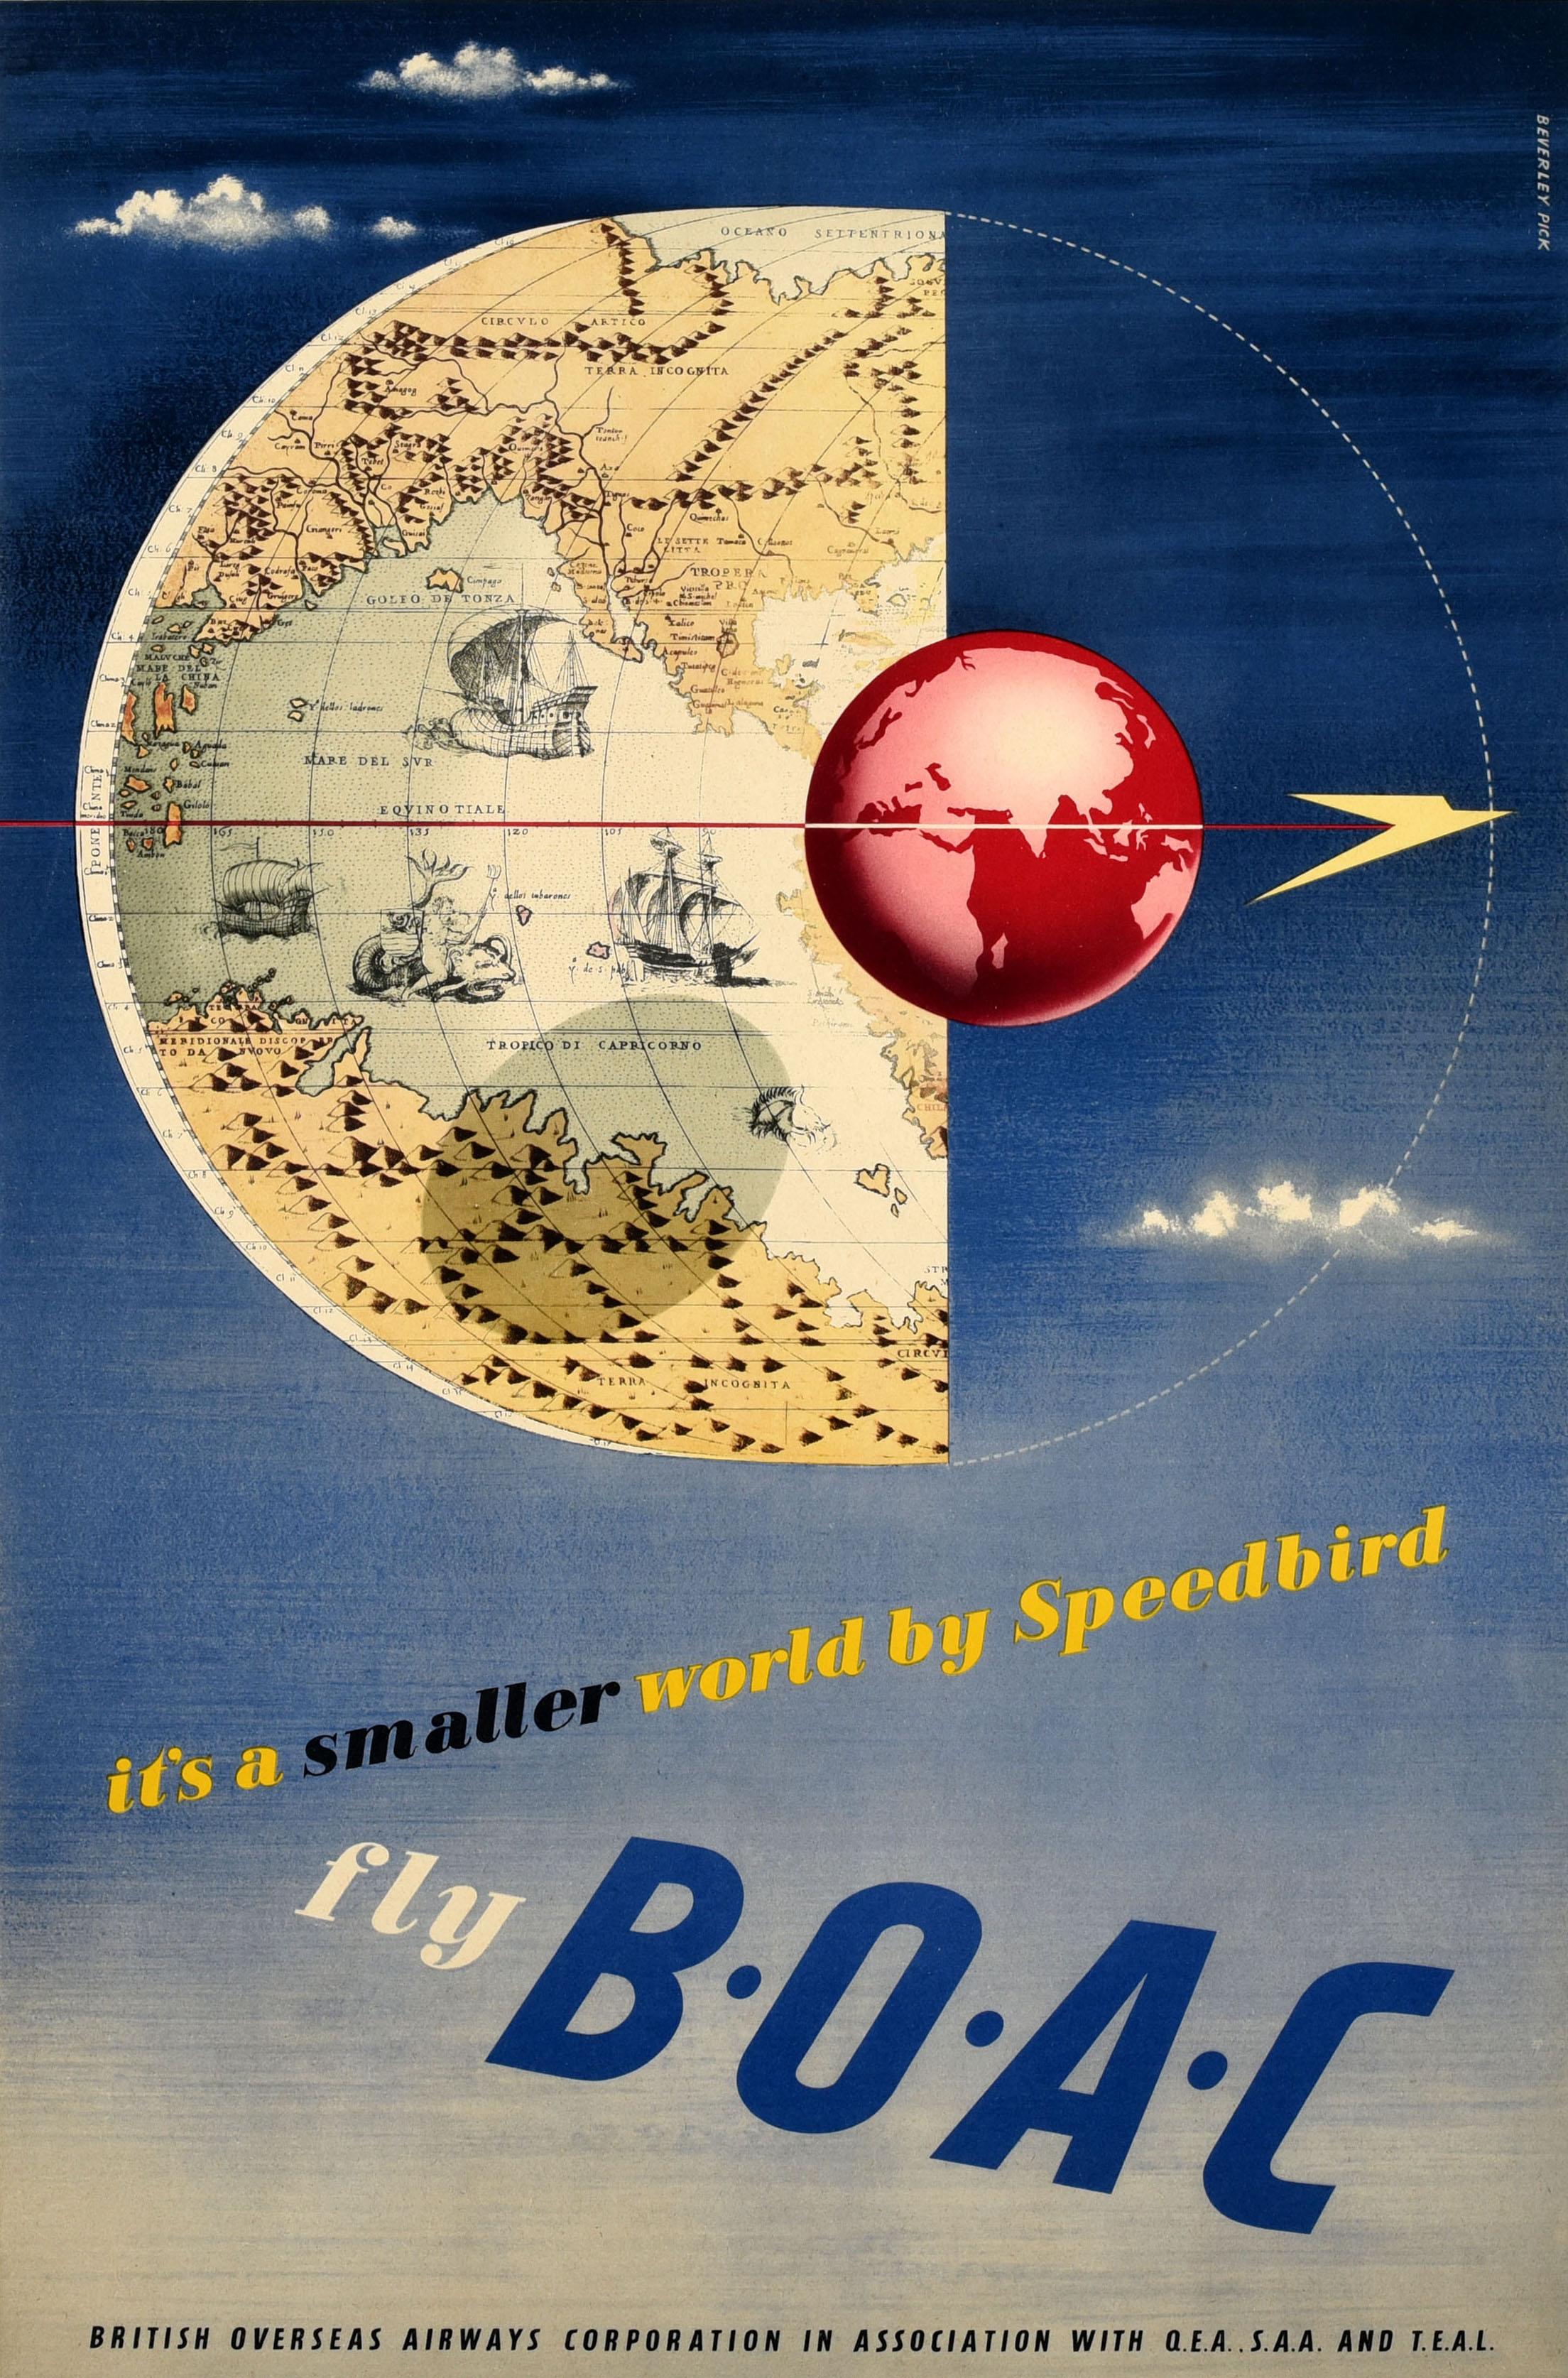 Original vintage travel advertising poster - it's a smaller world by Speedbird fly BOAC - featuring a great mid-century design depicting a modern map of the world on a red globe reflected on an old world map showing tall ships sailing at sea set on